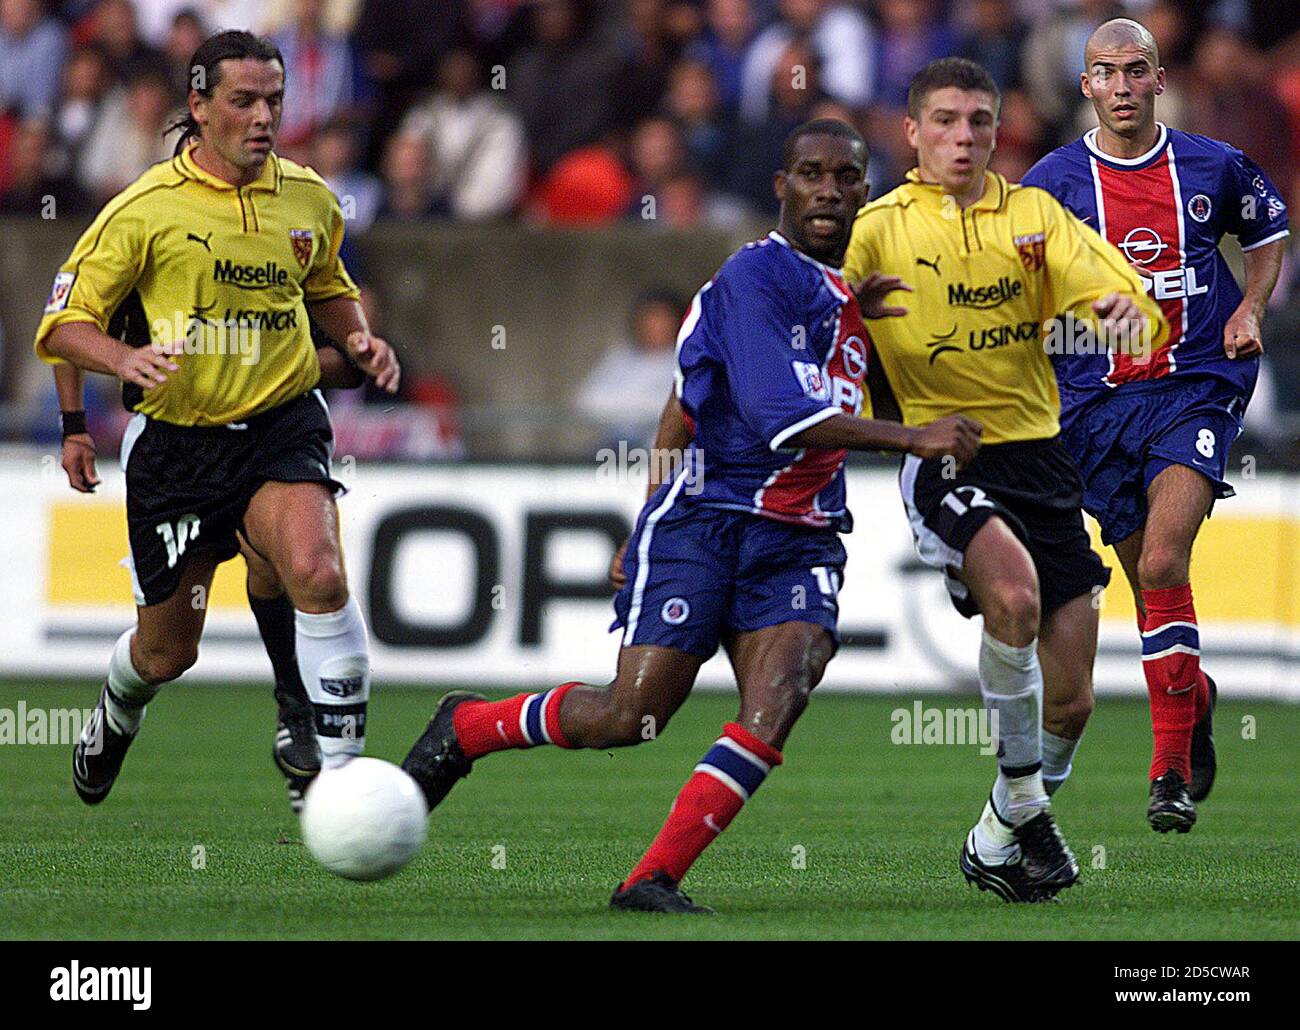 Nigerian Jay Jay Okocha Of Paris Saint Germain 2l Passes The Ball As Team Mate Jerome Leroy R Looks On Under Attention From Frederic Meyrieu L And Gregory Proment Of Metz During Their French